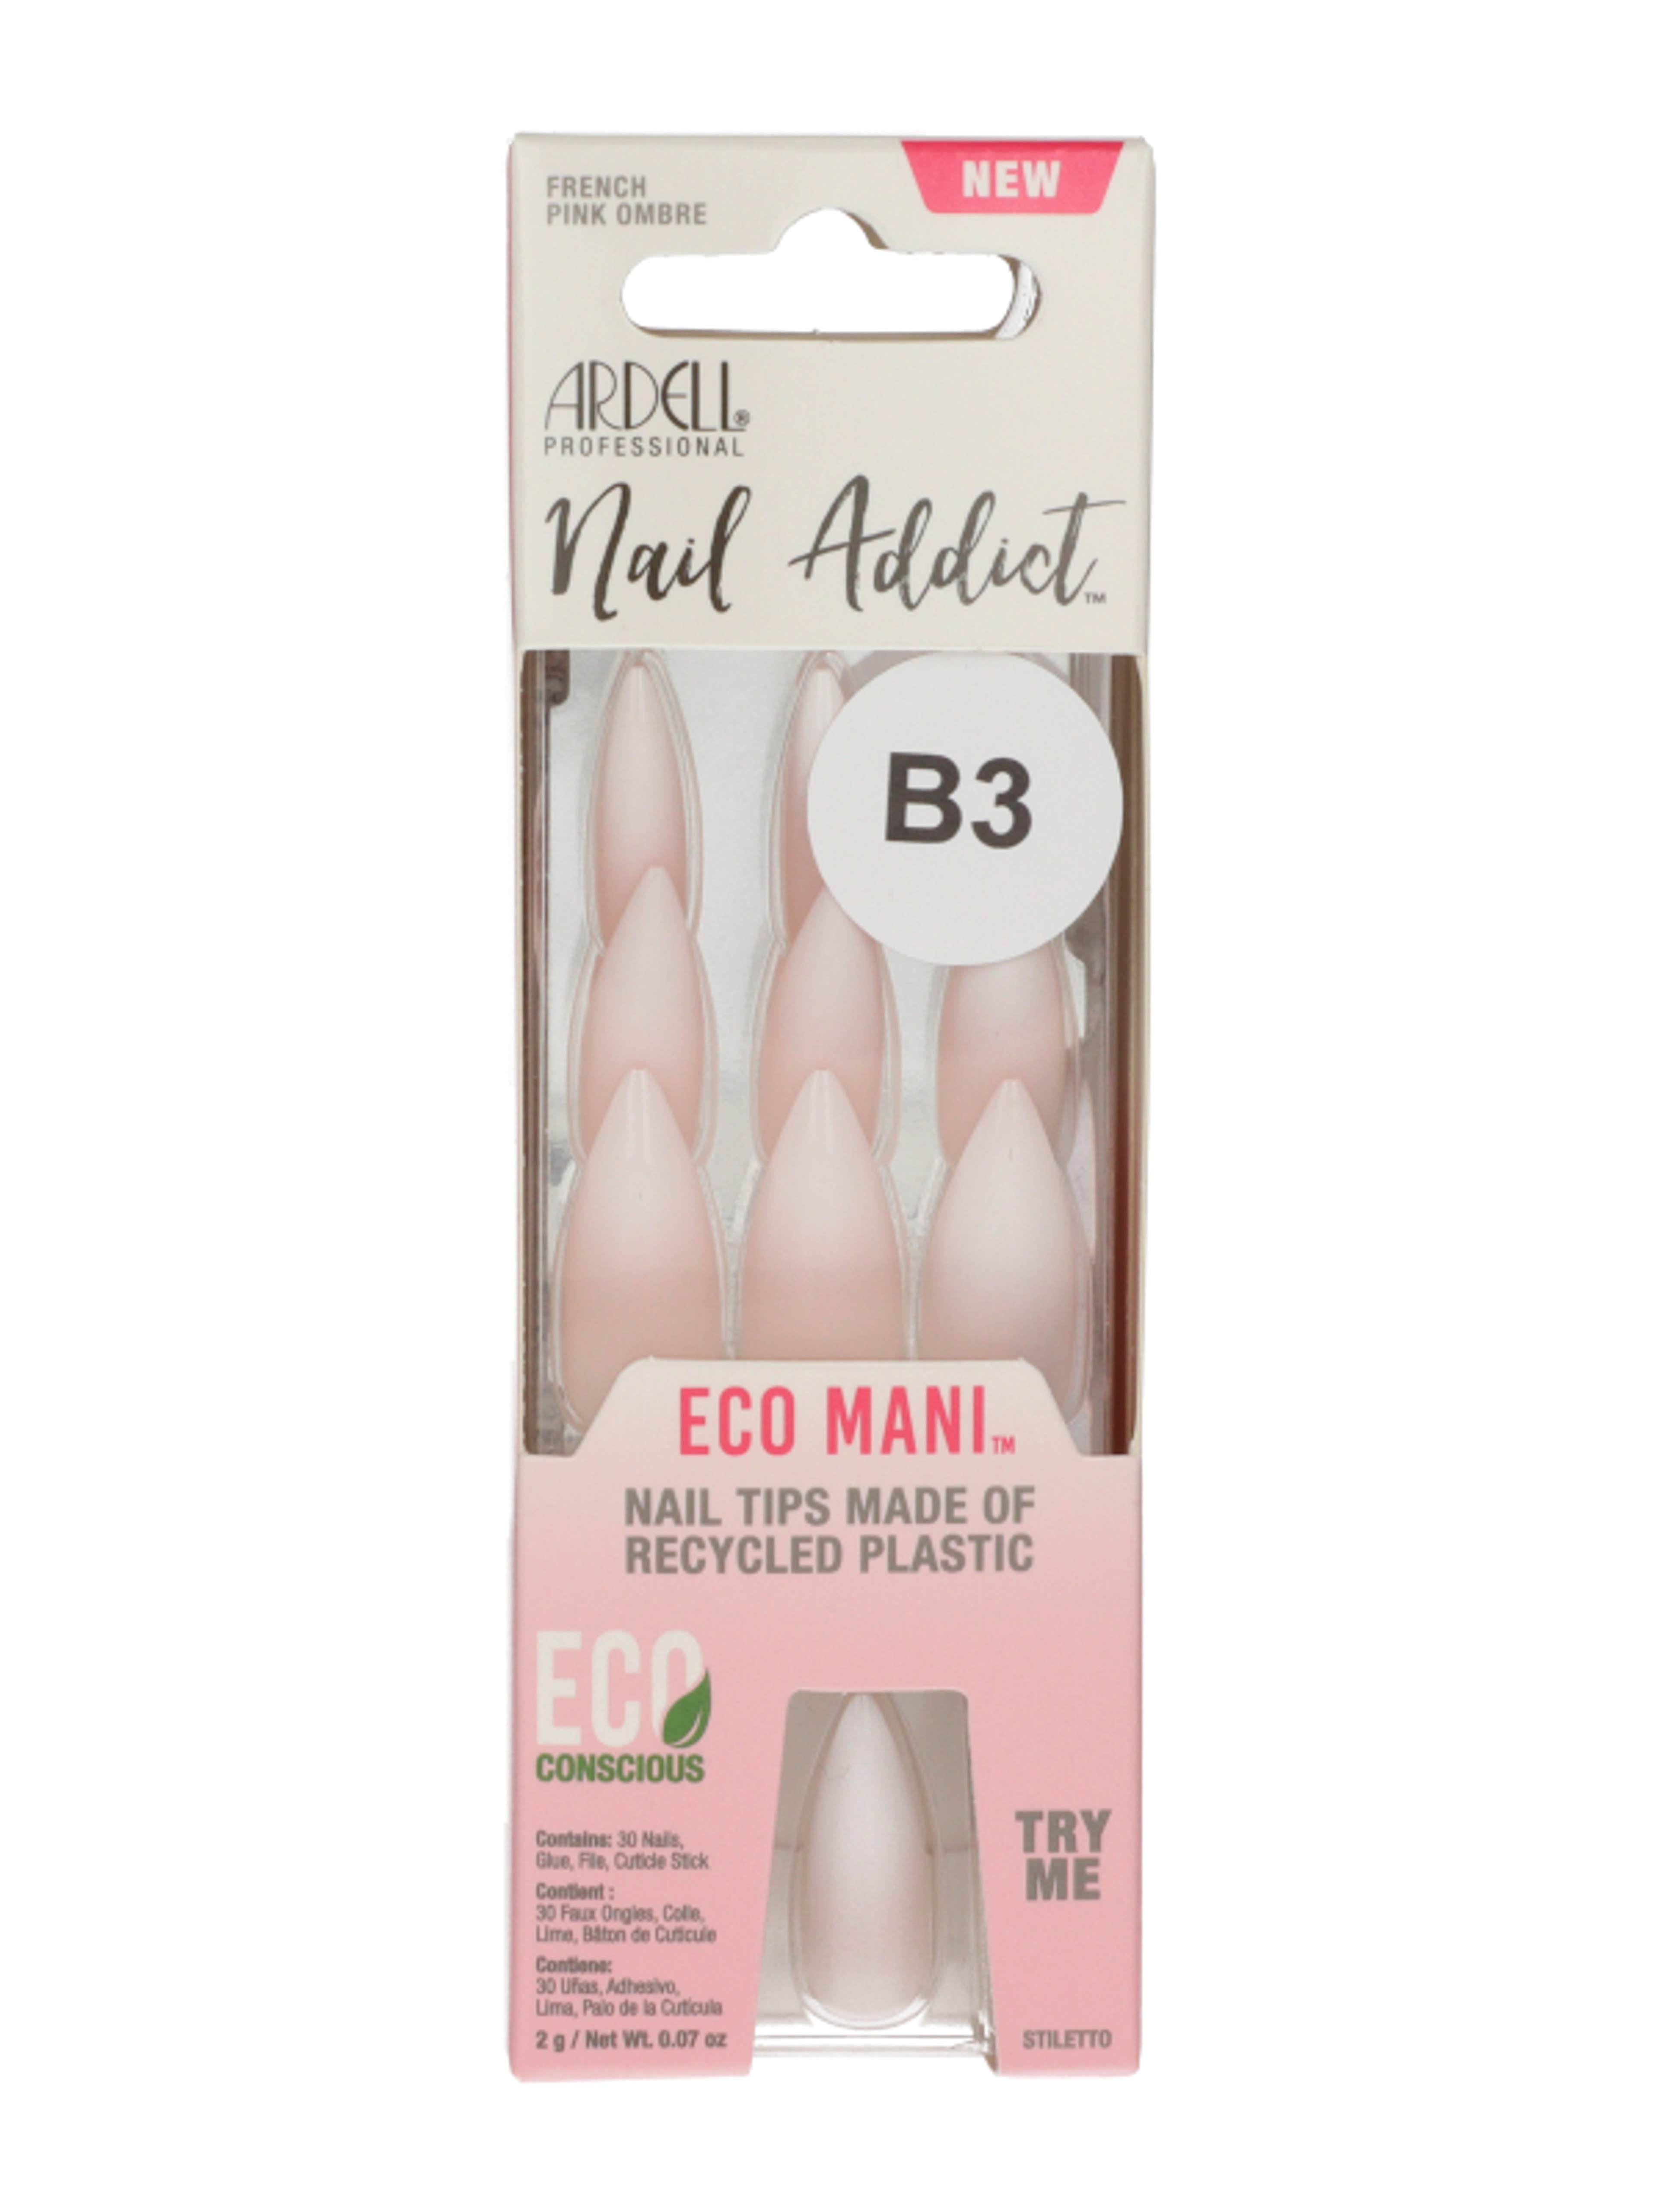 Ardell Naked Addict Eco műköröm /French Pink Ombre - 1 db